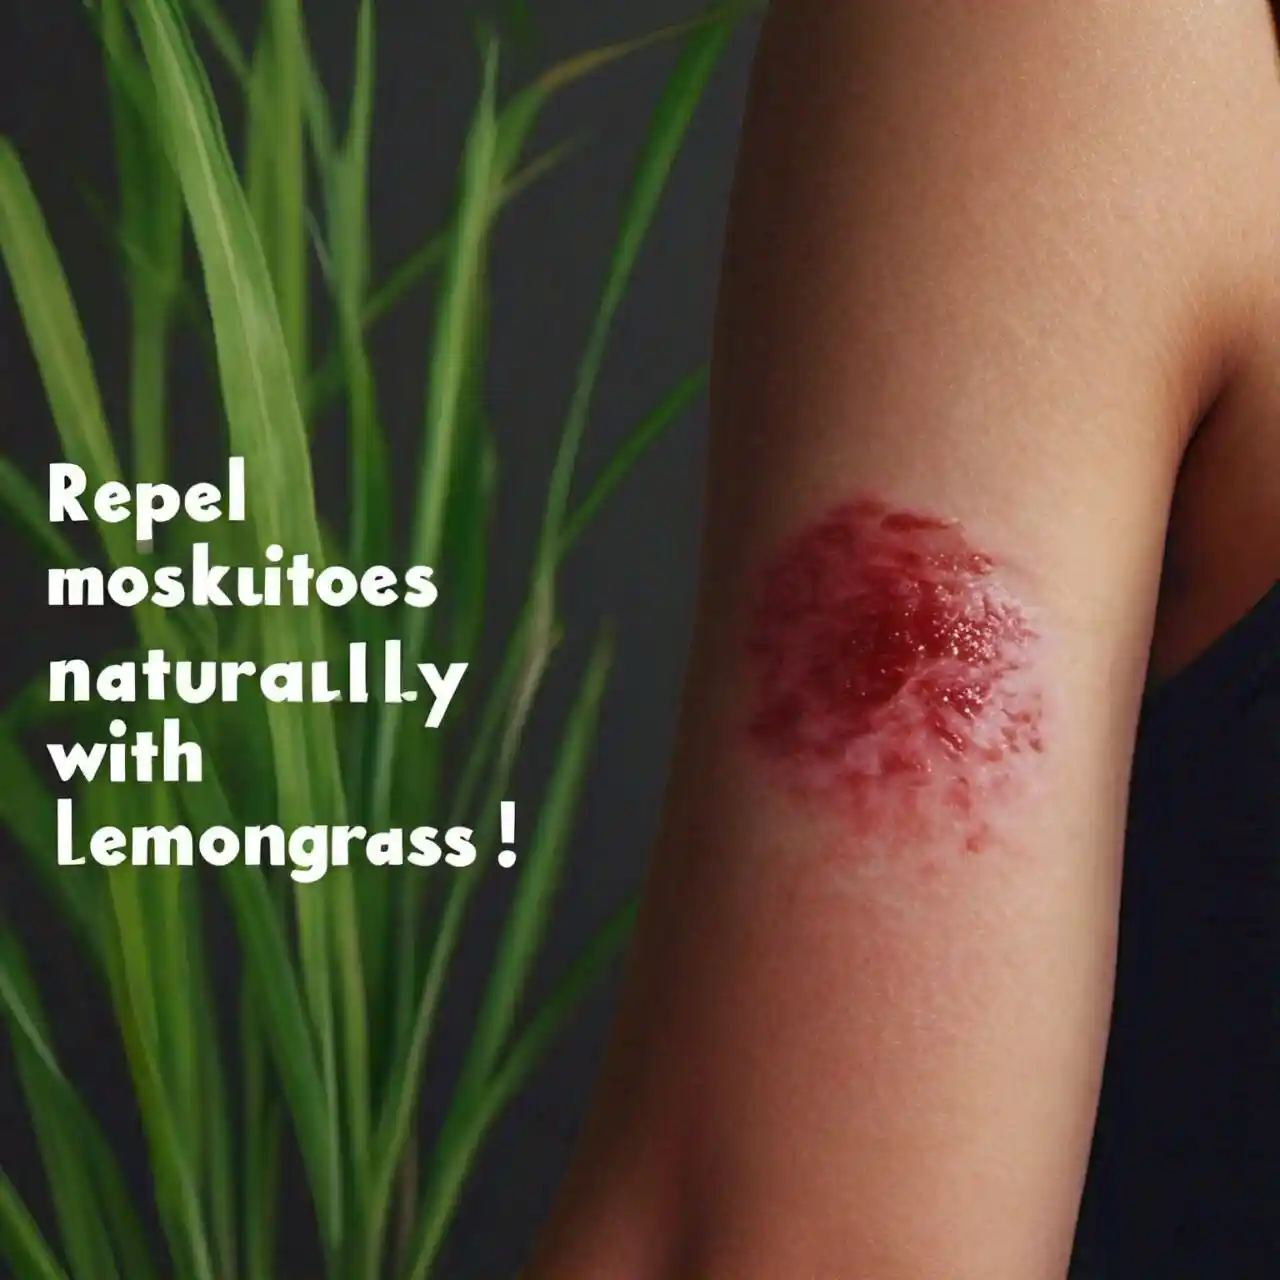 Repel mosquitoes naturally with lemongrass